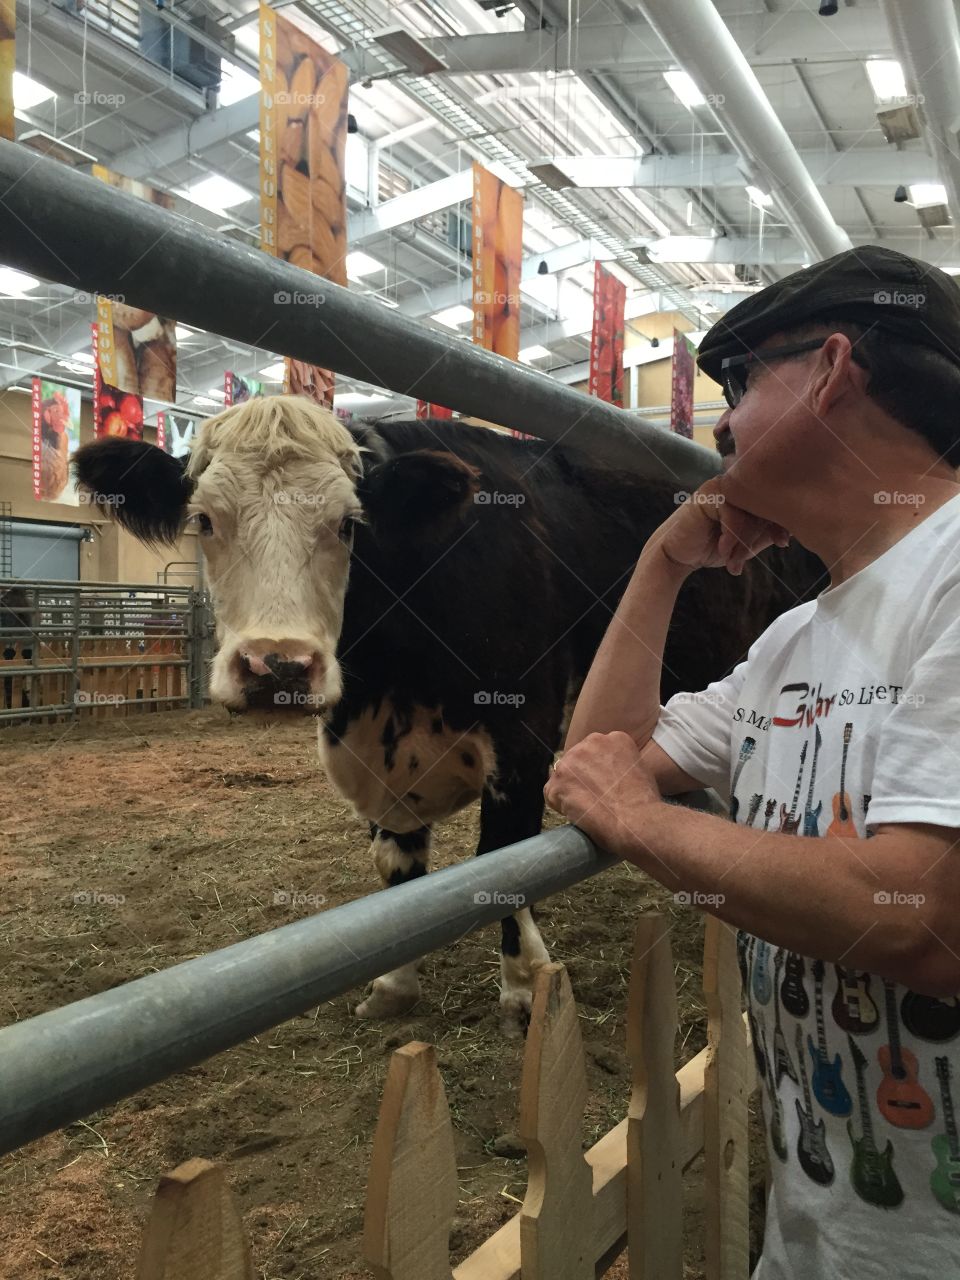 Meet the oldest living cow. . Oldest living cow greeting a person observing him at the county fair.